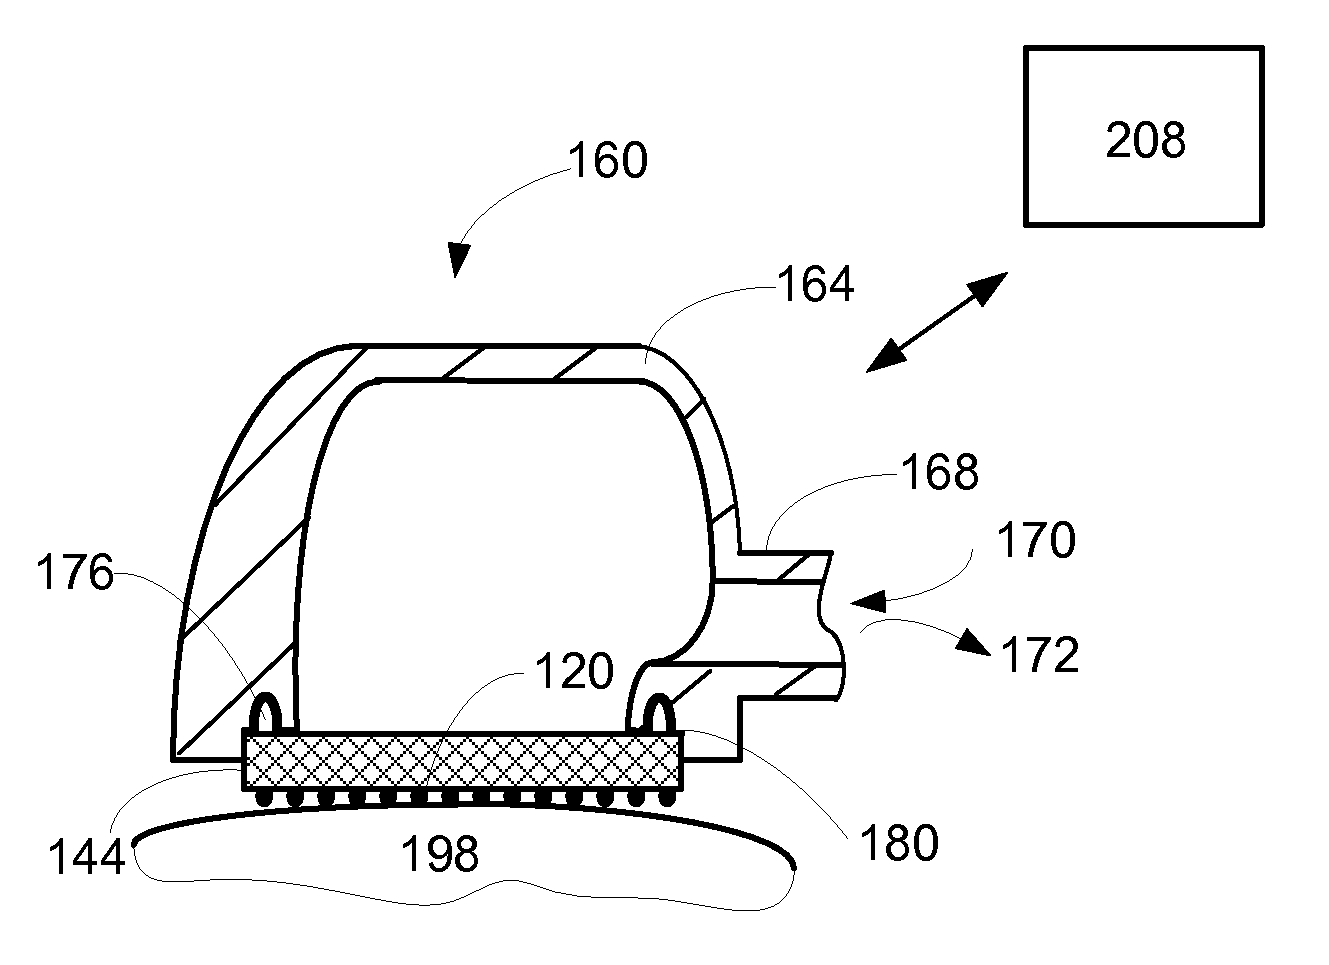 Disposable electromagnetic energy applicator and method of using it